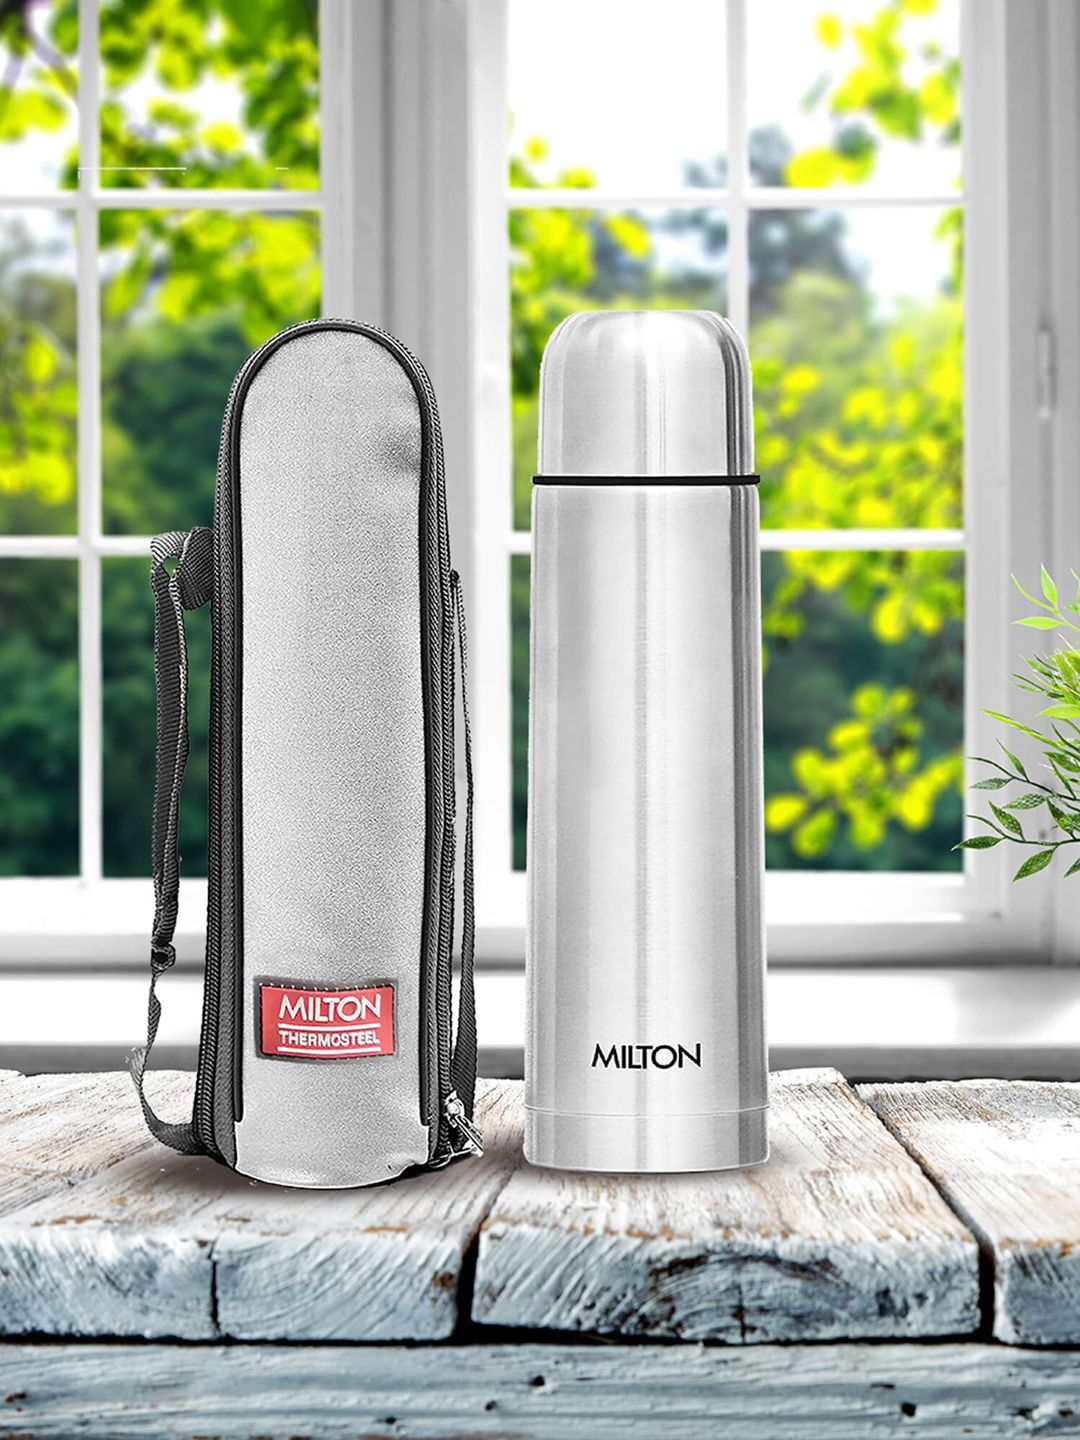 Milton 500 Thermosteel 24 Hours Hot and Cold Water Bottle, 500 ml